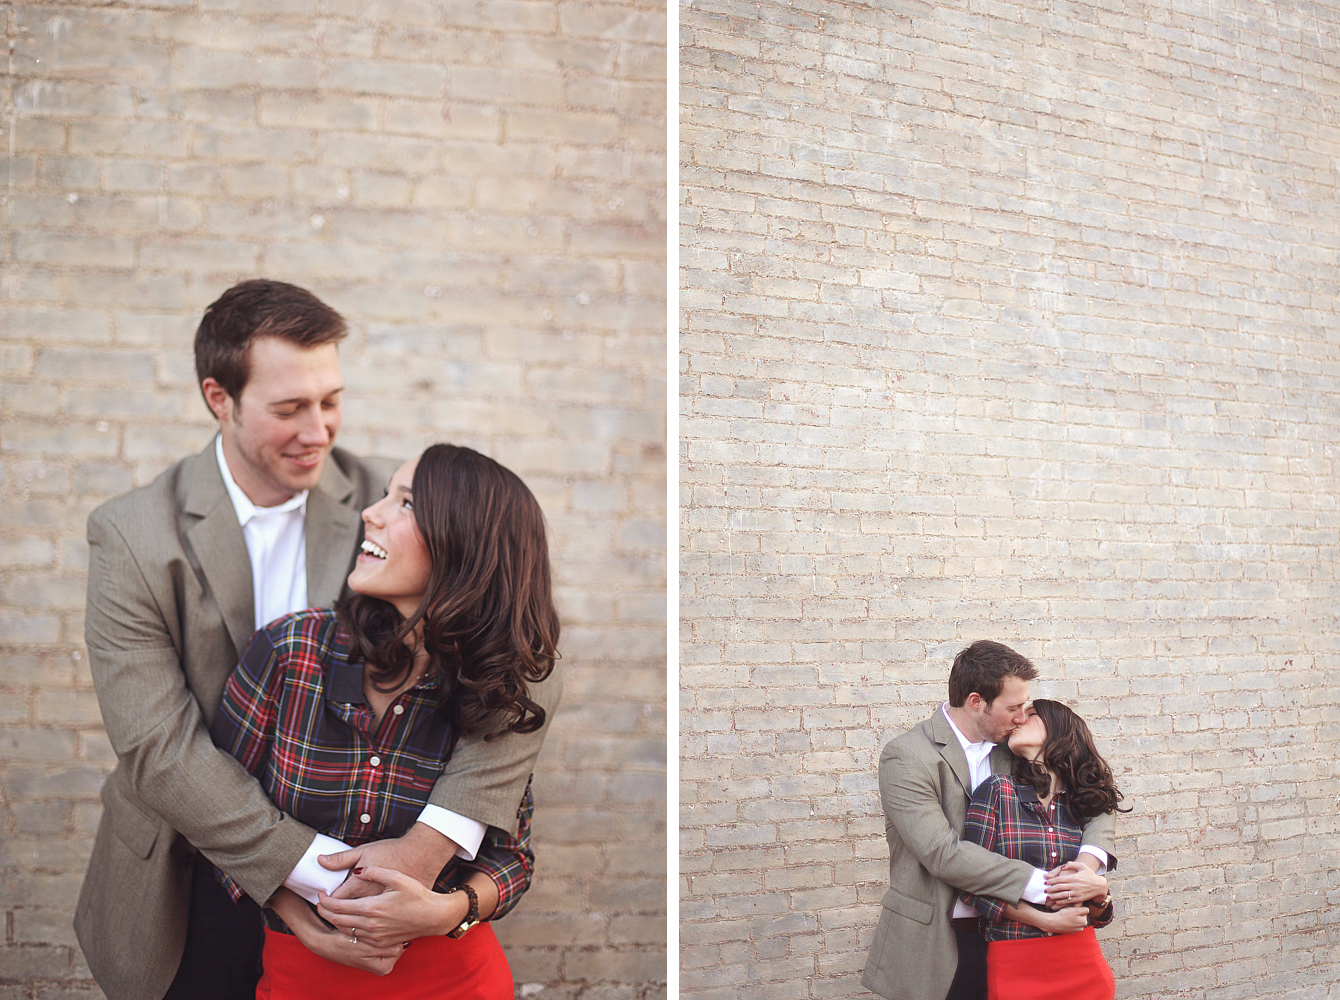 When to do engagement photos